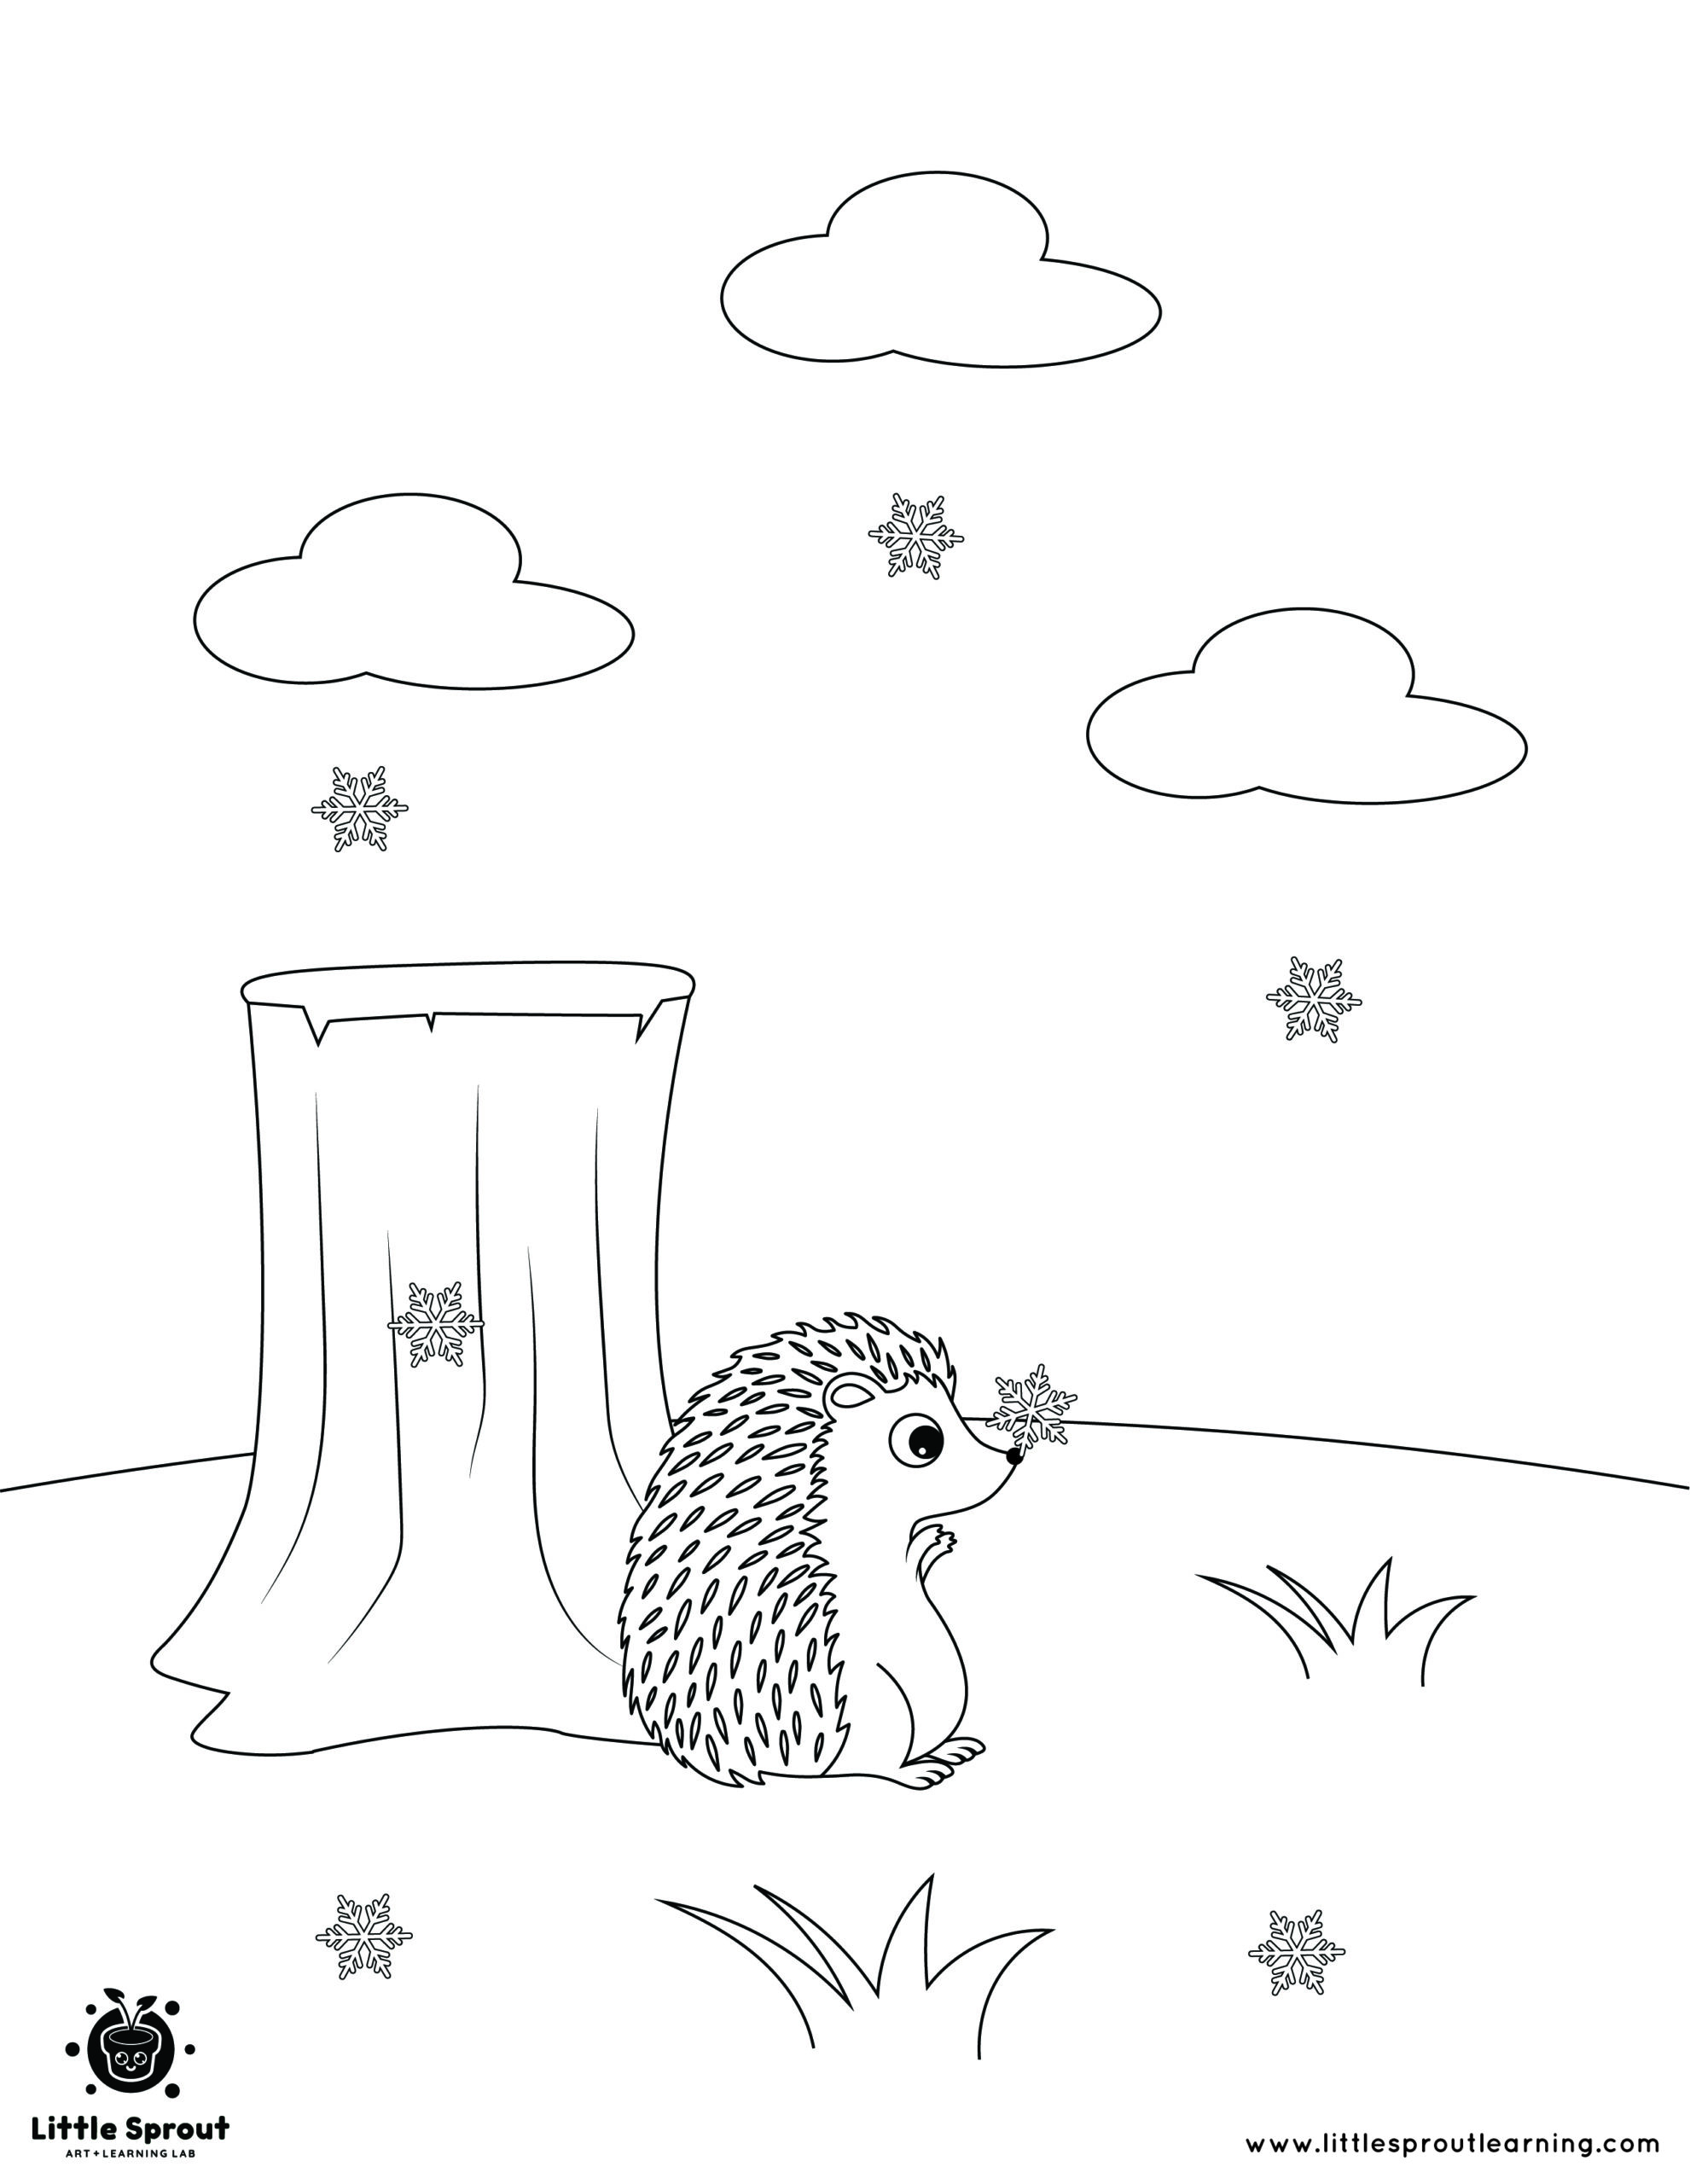 Hedgehog in the Snow – Hibernating Animals Coloring Page